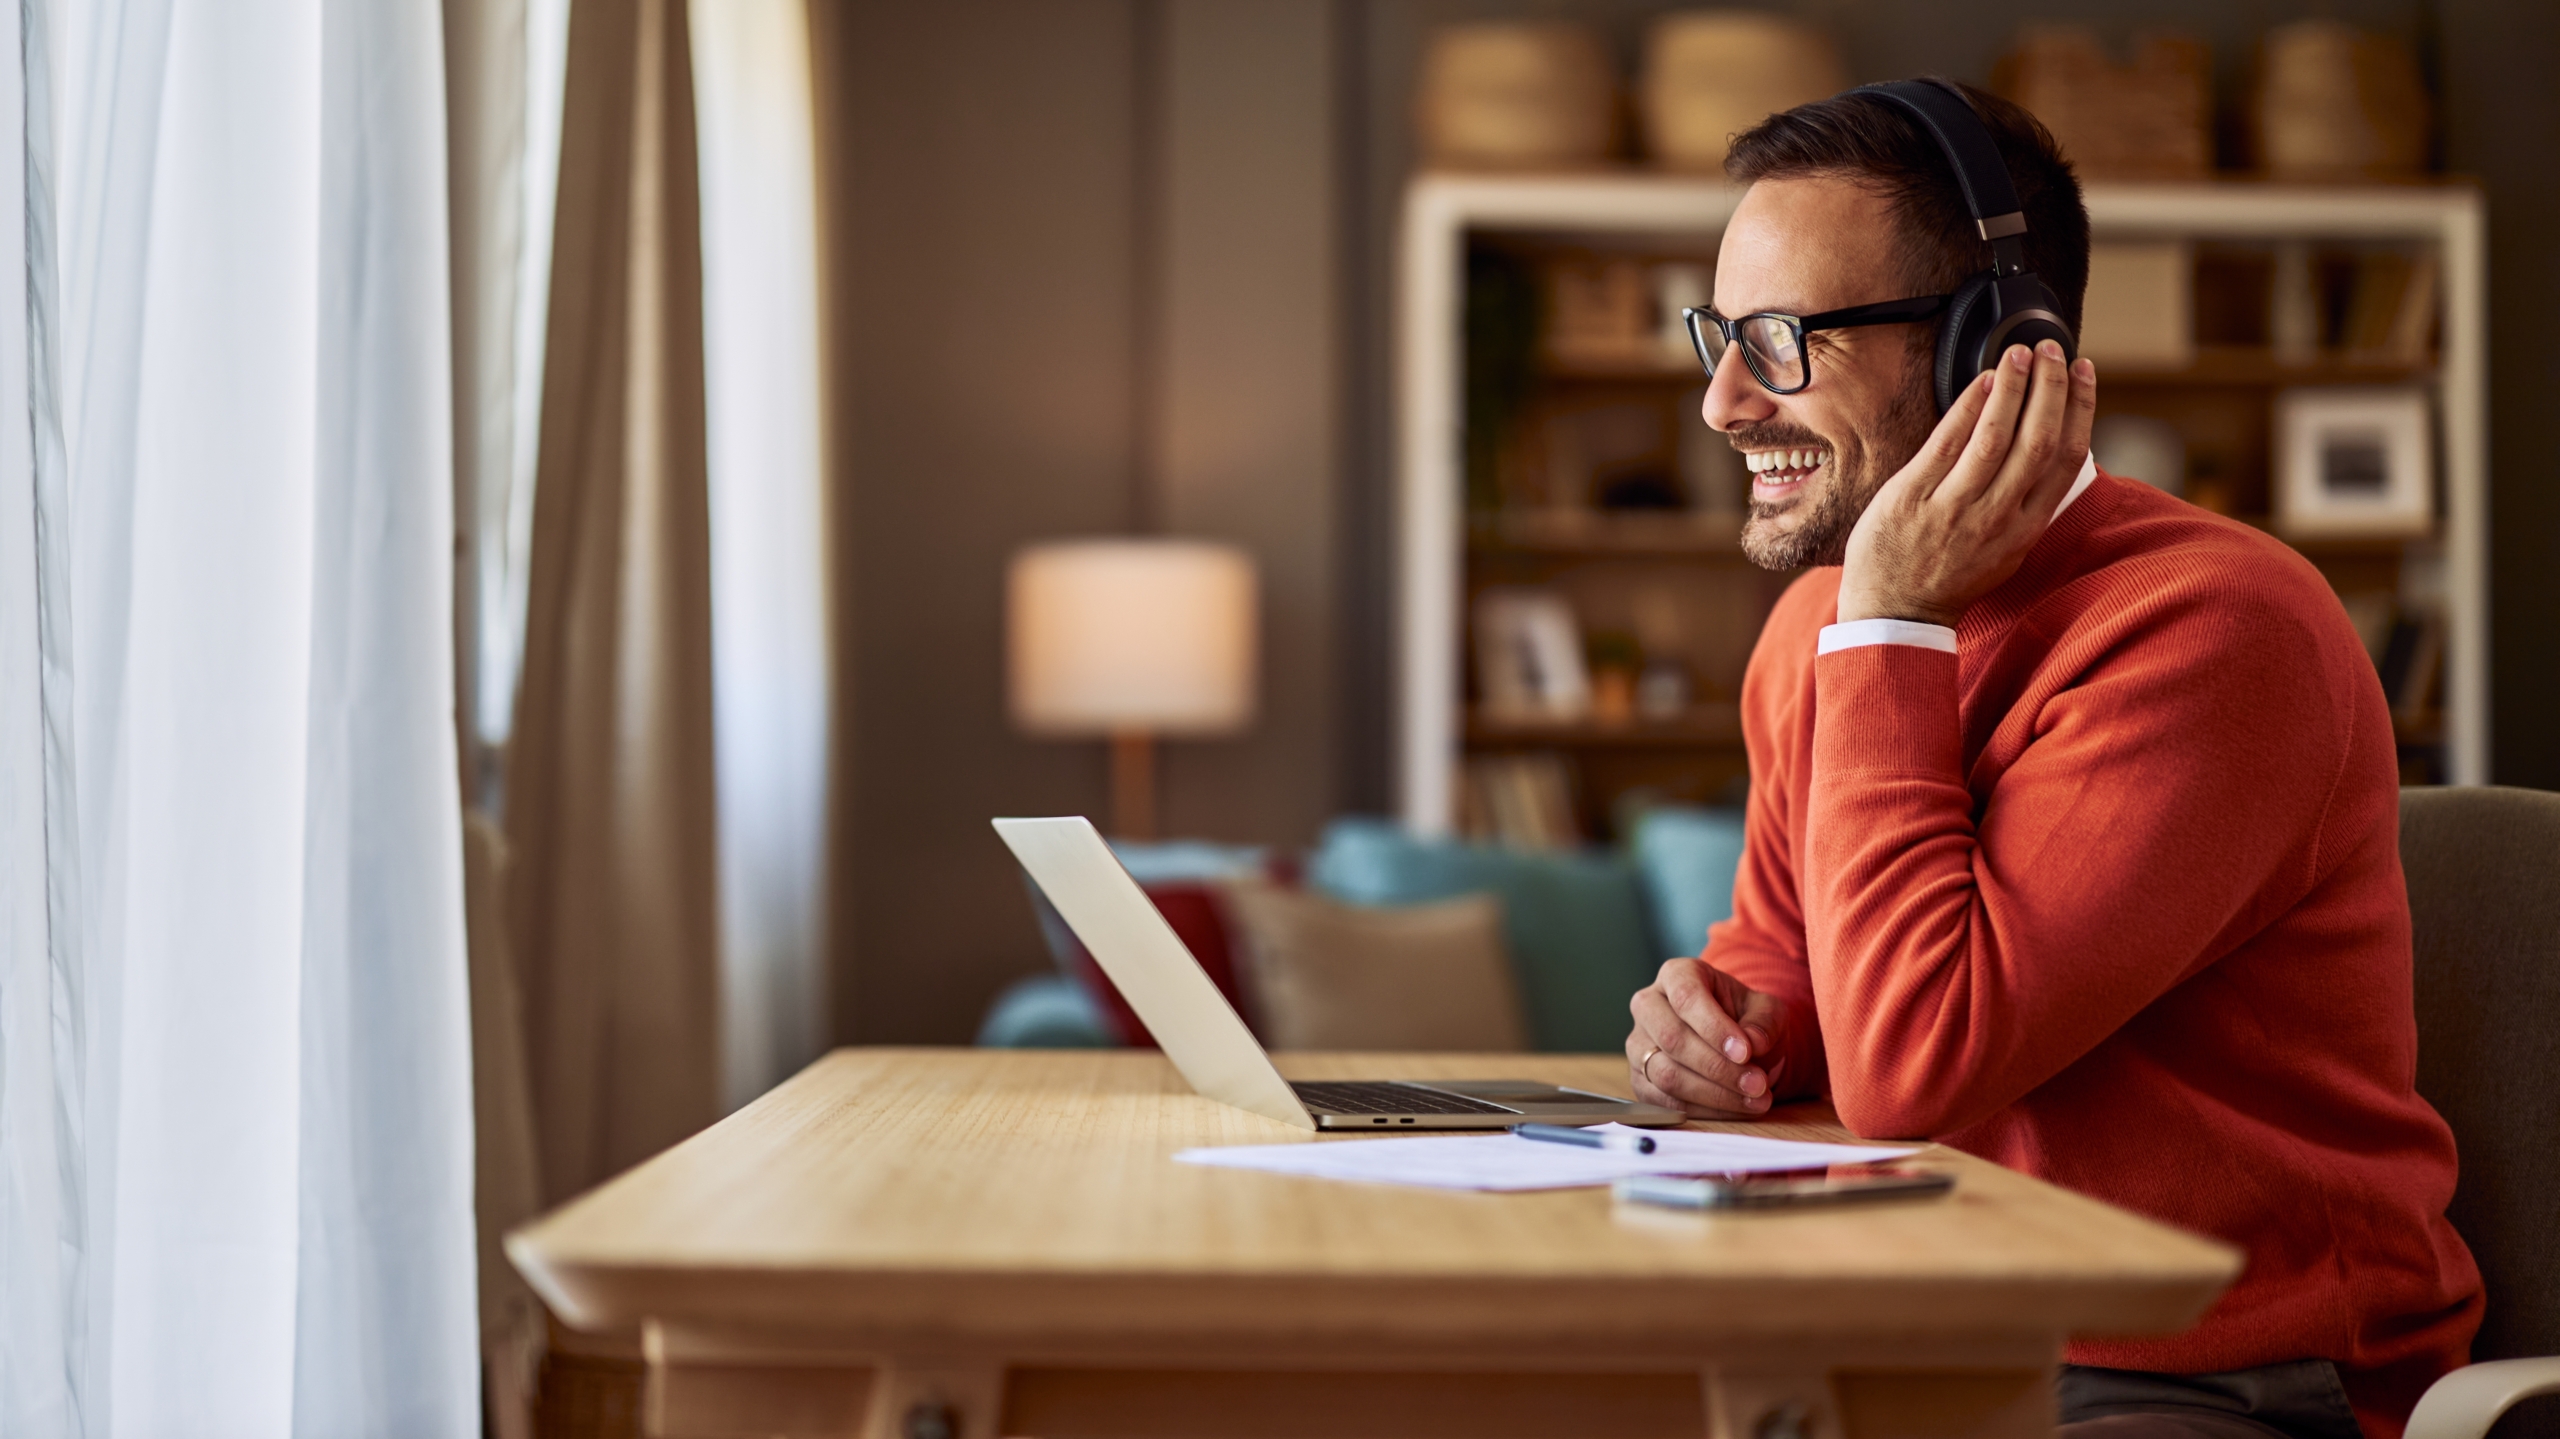 Home worker wearing headphones smiling during a call using a unified communications solution on a laptop. 